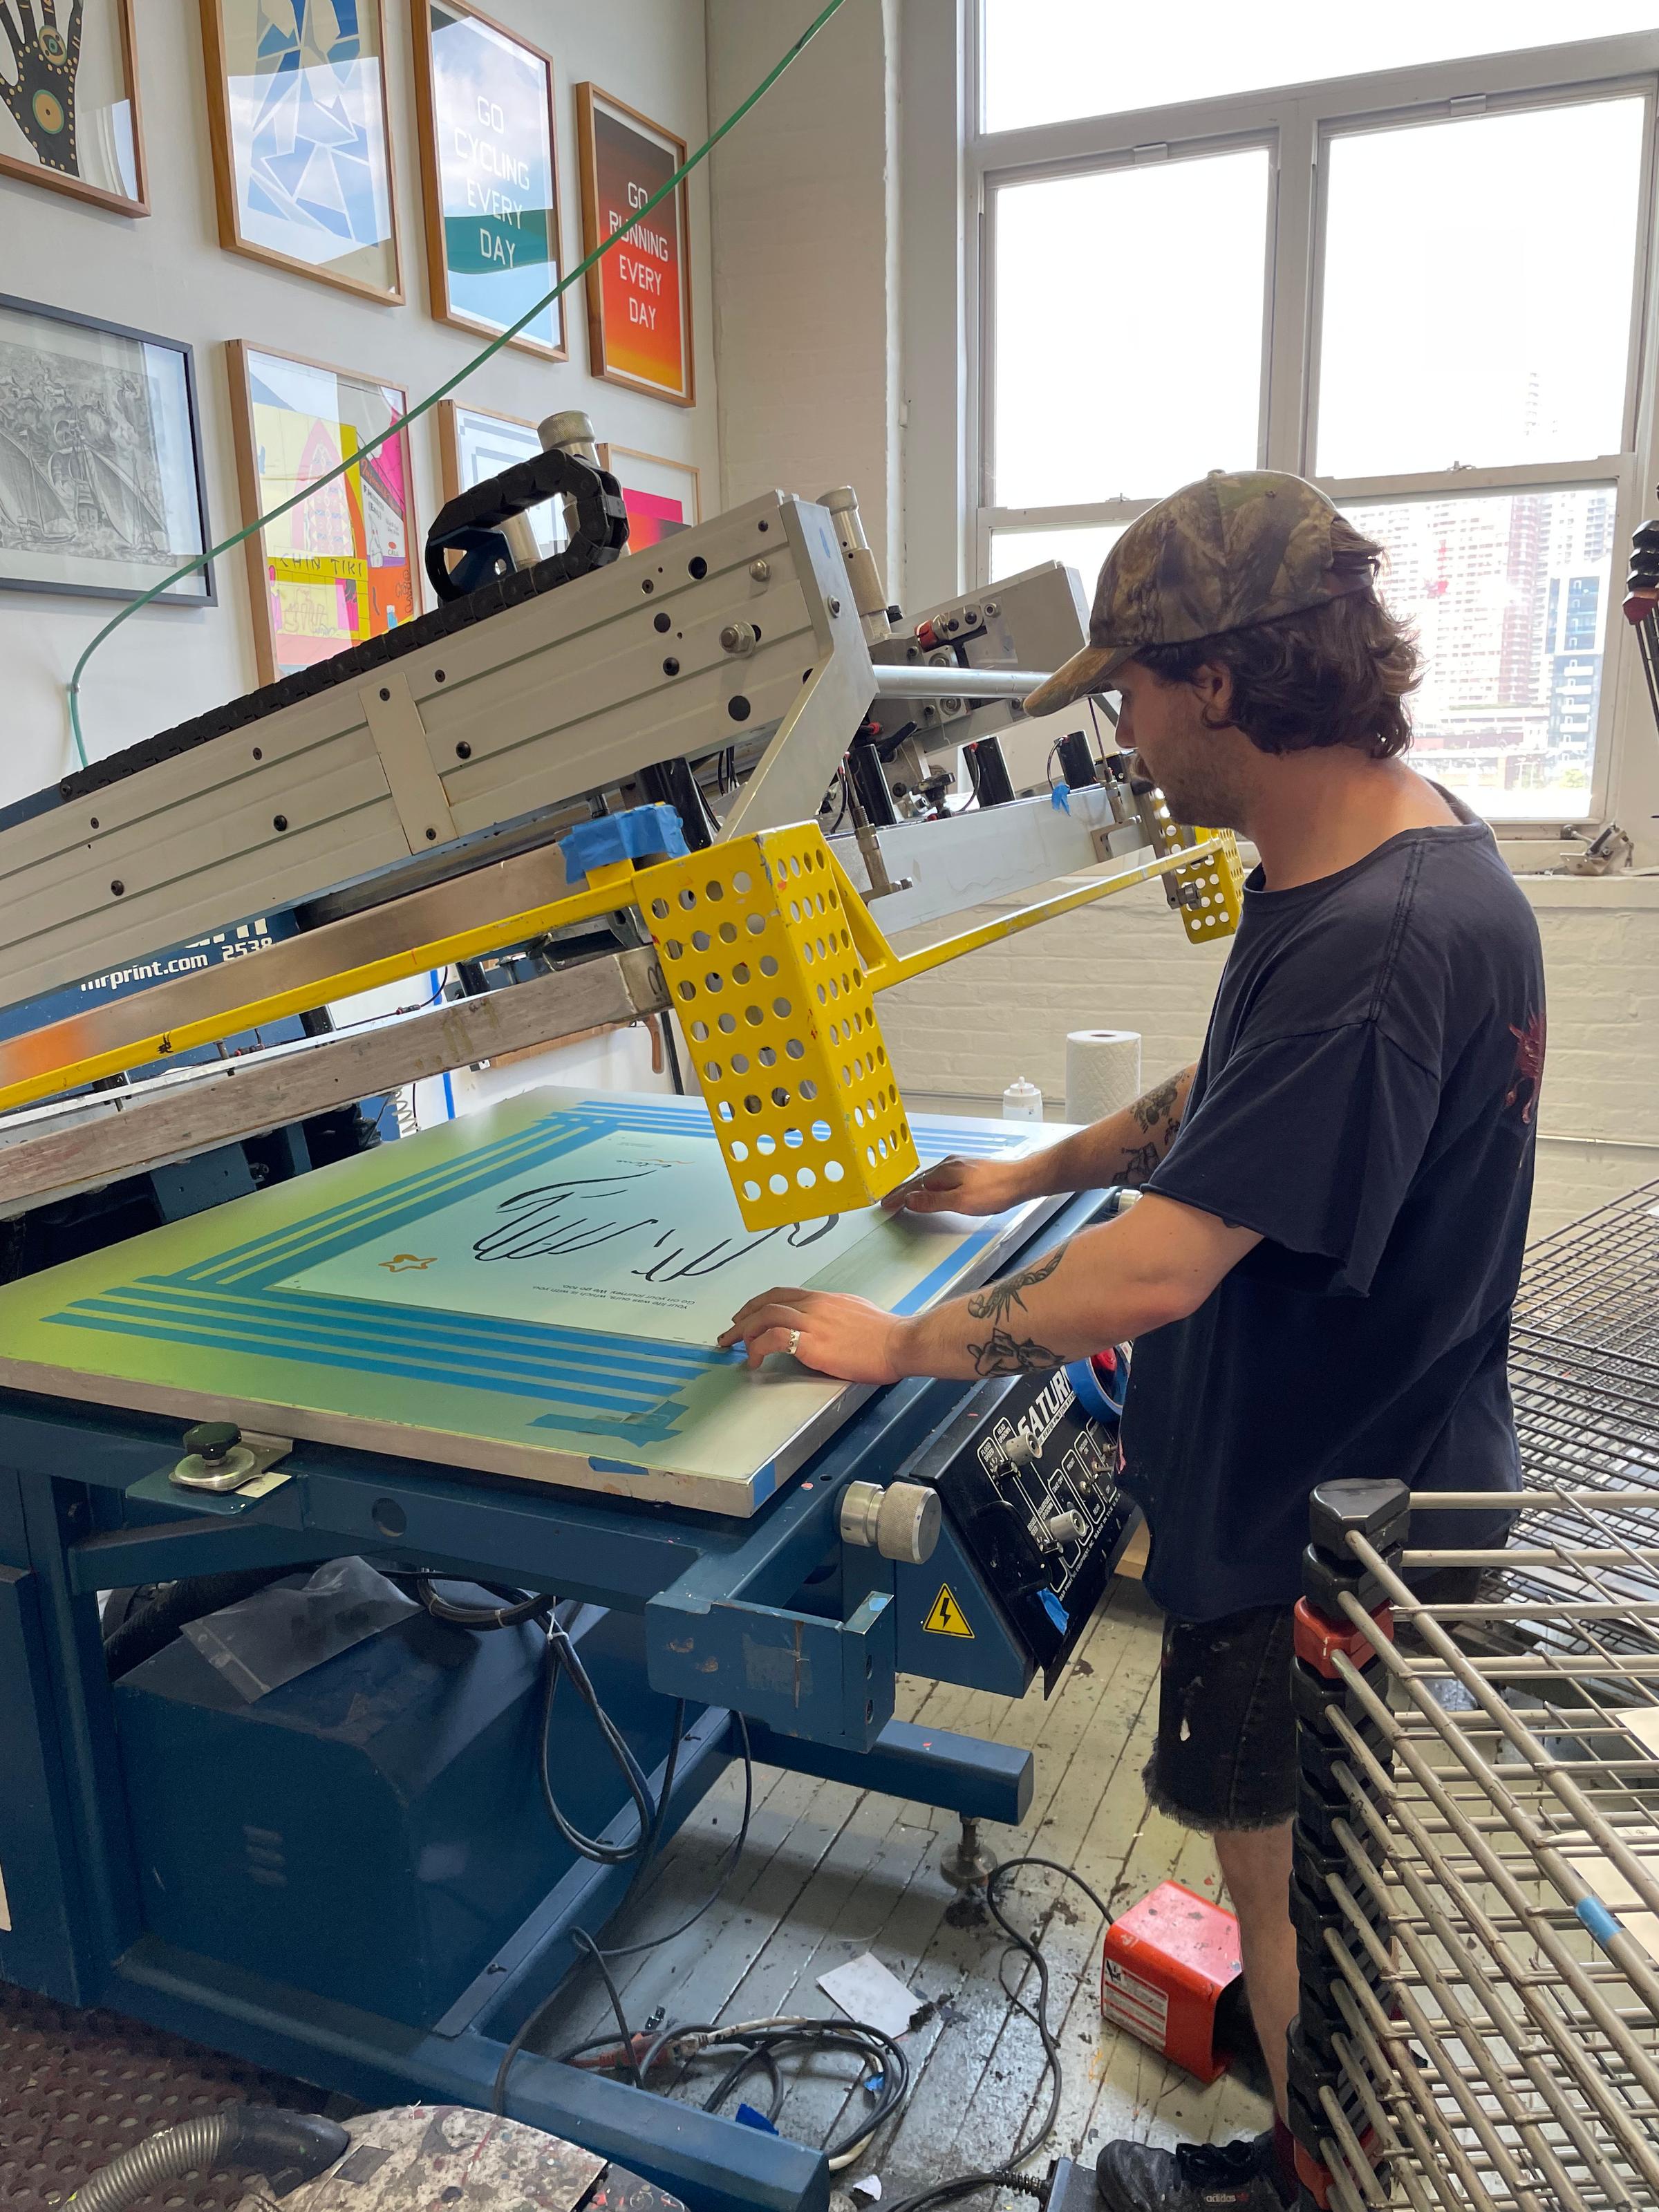 A behind the scenes look at the art print being produced in Brooklyn, NY.